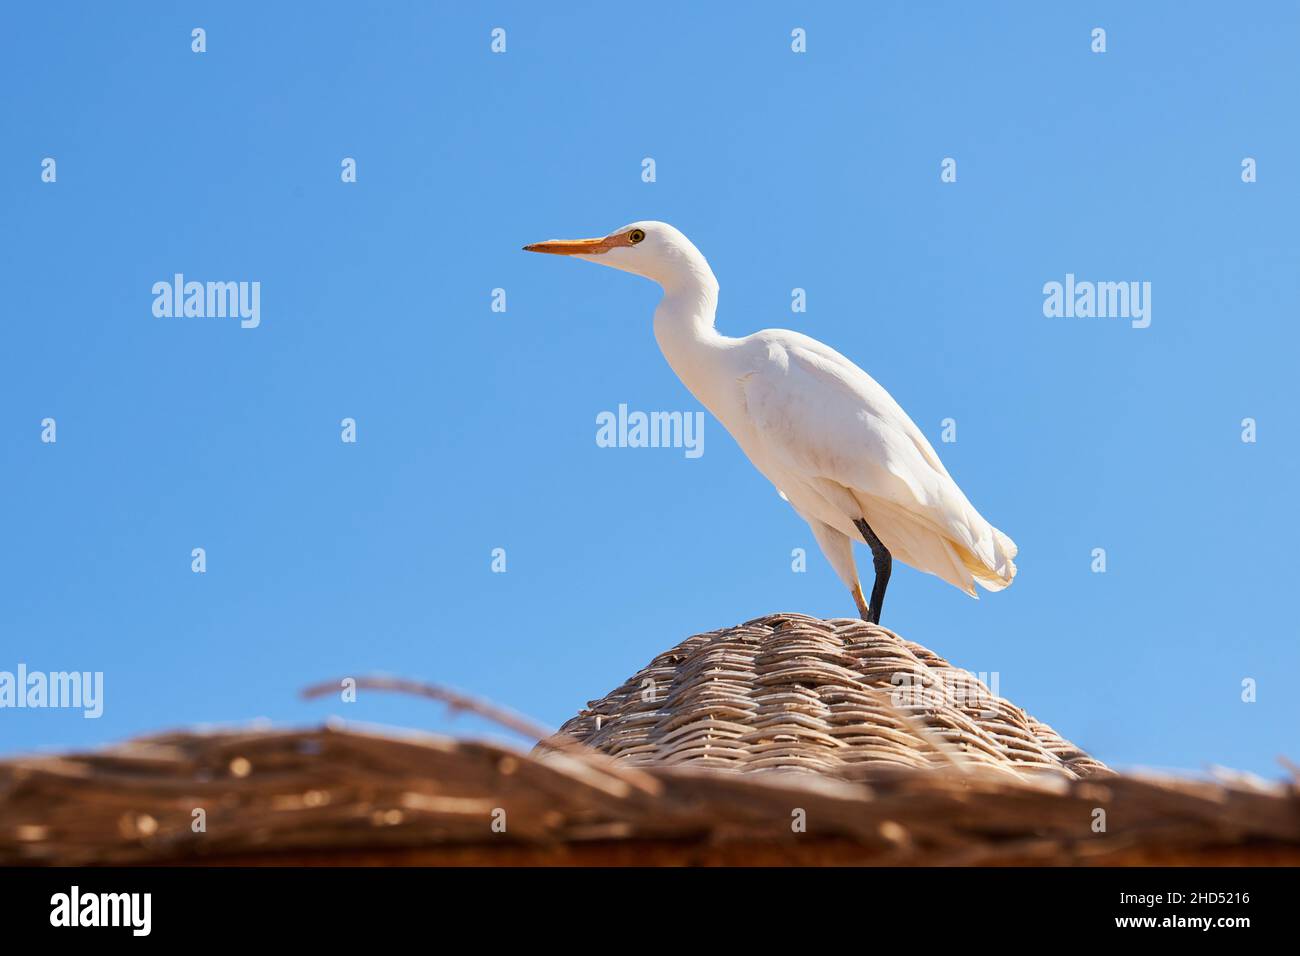 White cattle egret wild bird, also known as Bubulcus ibis, is standing on the top of wicker umbrella at the beach Stock Photo